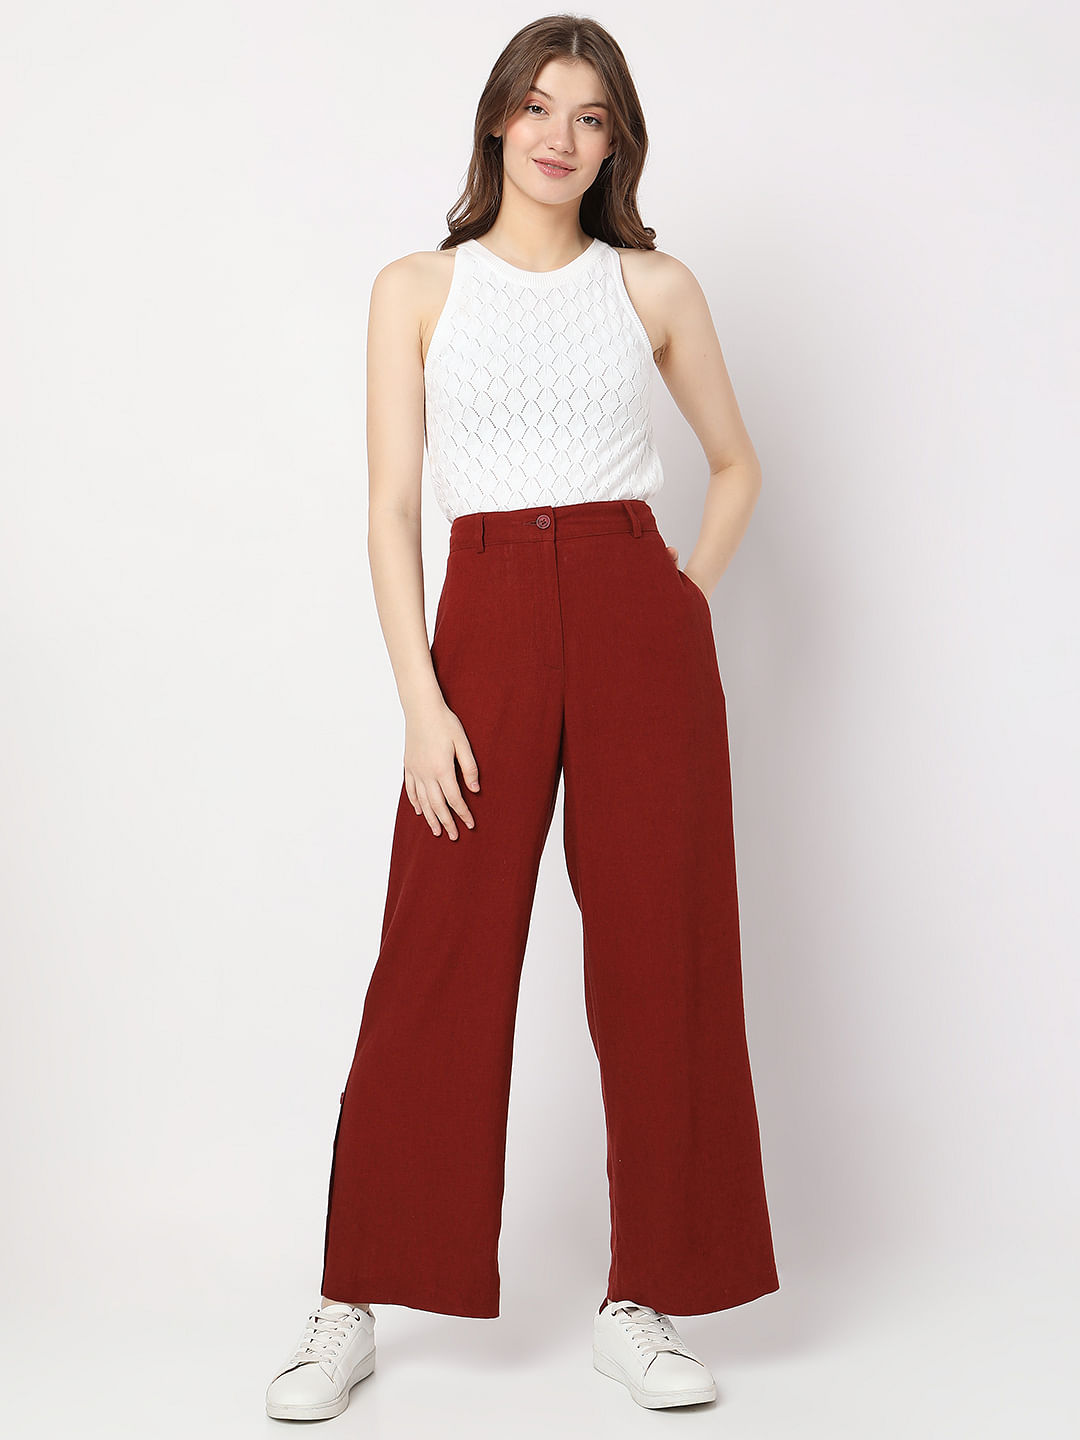 Chic Red Pants - High Waisted Pants - Red Trousers - $37.00 - Lulus